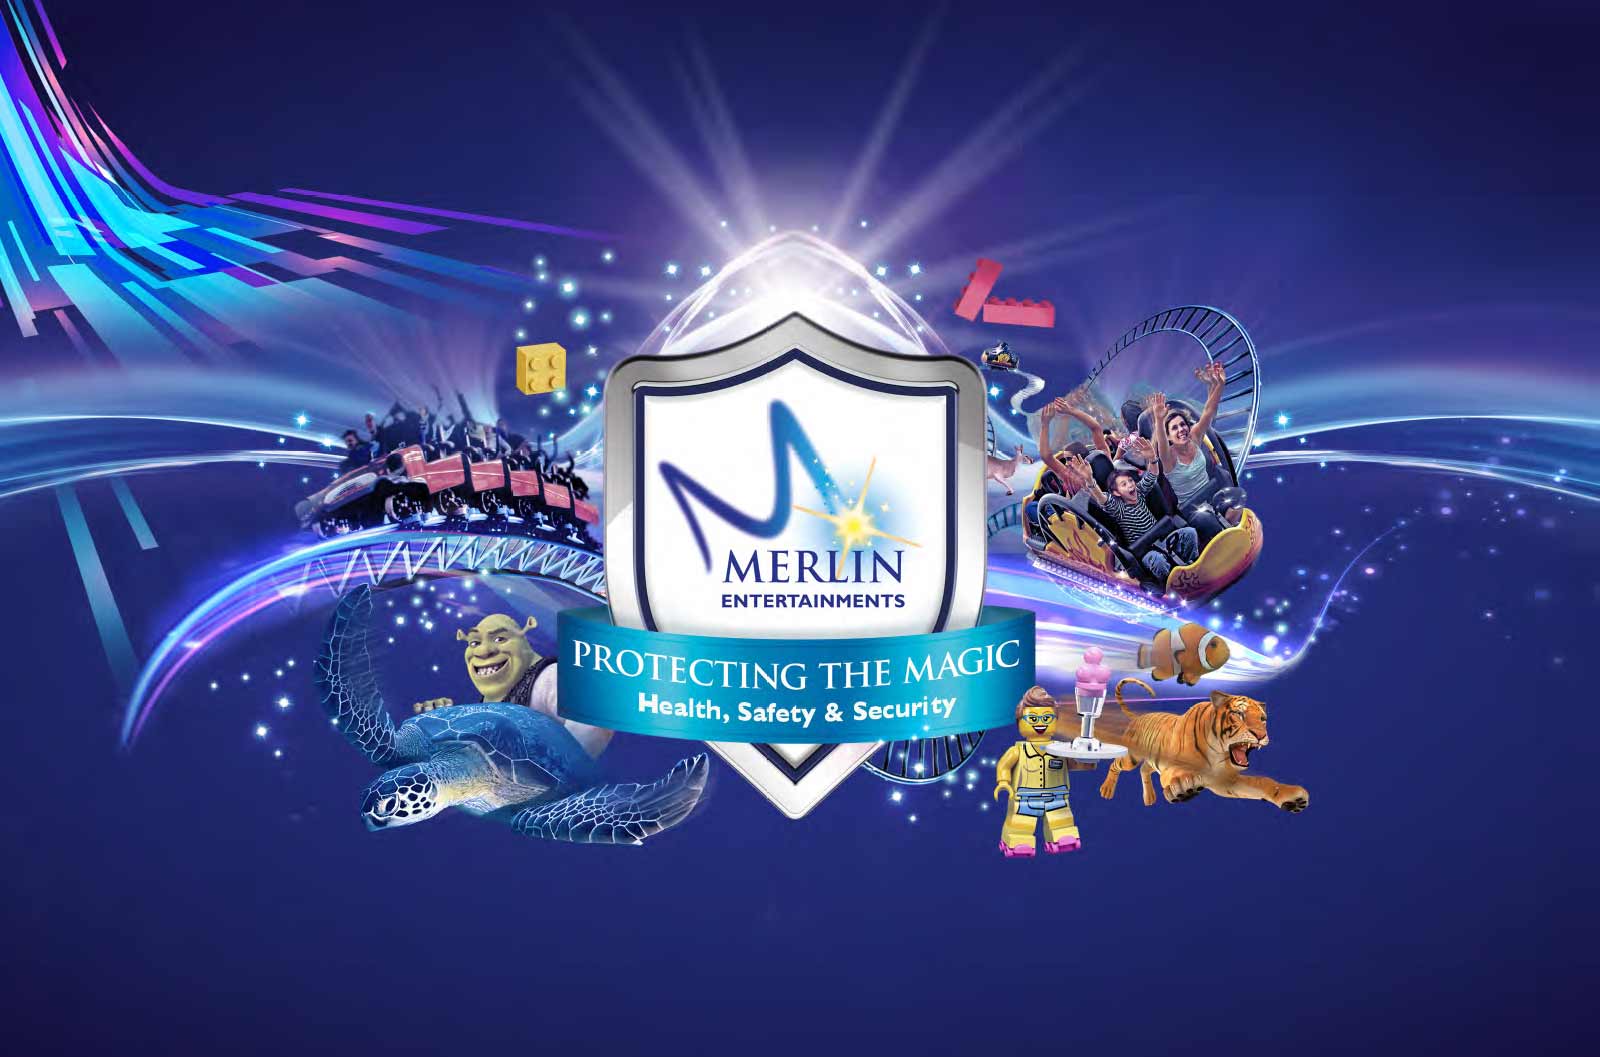 Resident Hotels Engages with Merlin Entertainments to Encourage London Visitors   